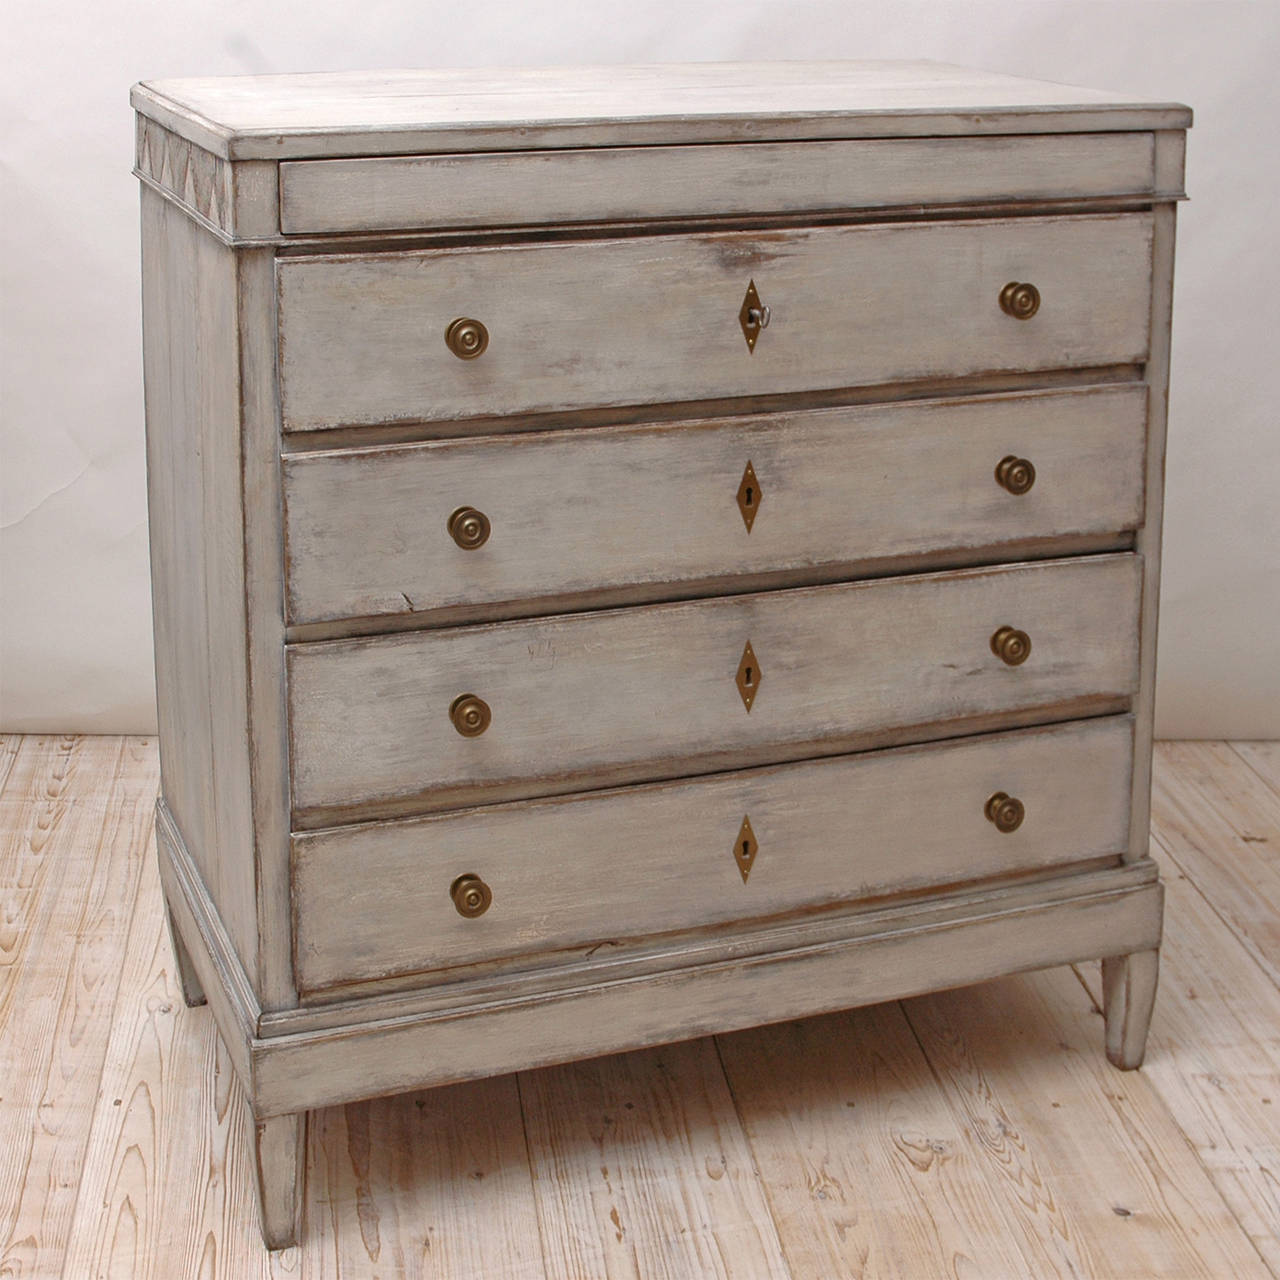 From the Schleswig-Holstein region of Germany, a handsome painted chest of drawers in oak from the last quarter of the 1700s. Features a total of five drawers (the frieze below the top conceals a secret drawer). Dove-tailed and pegged joinery with